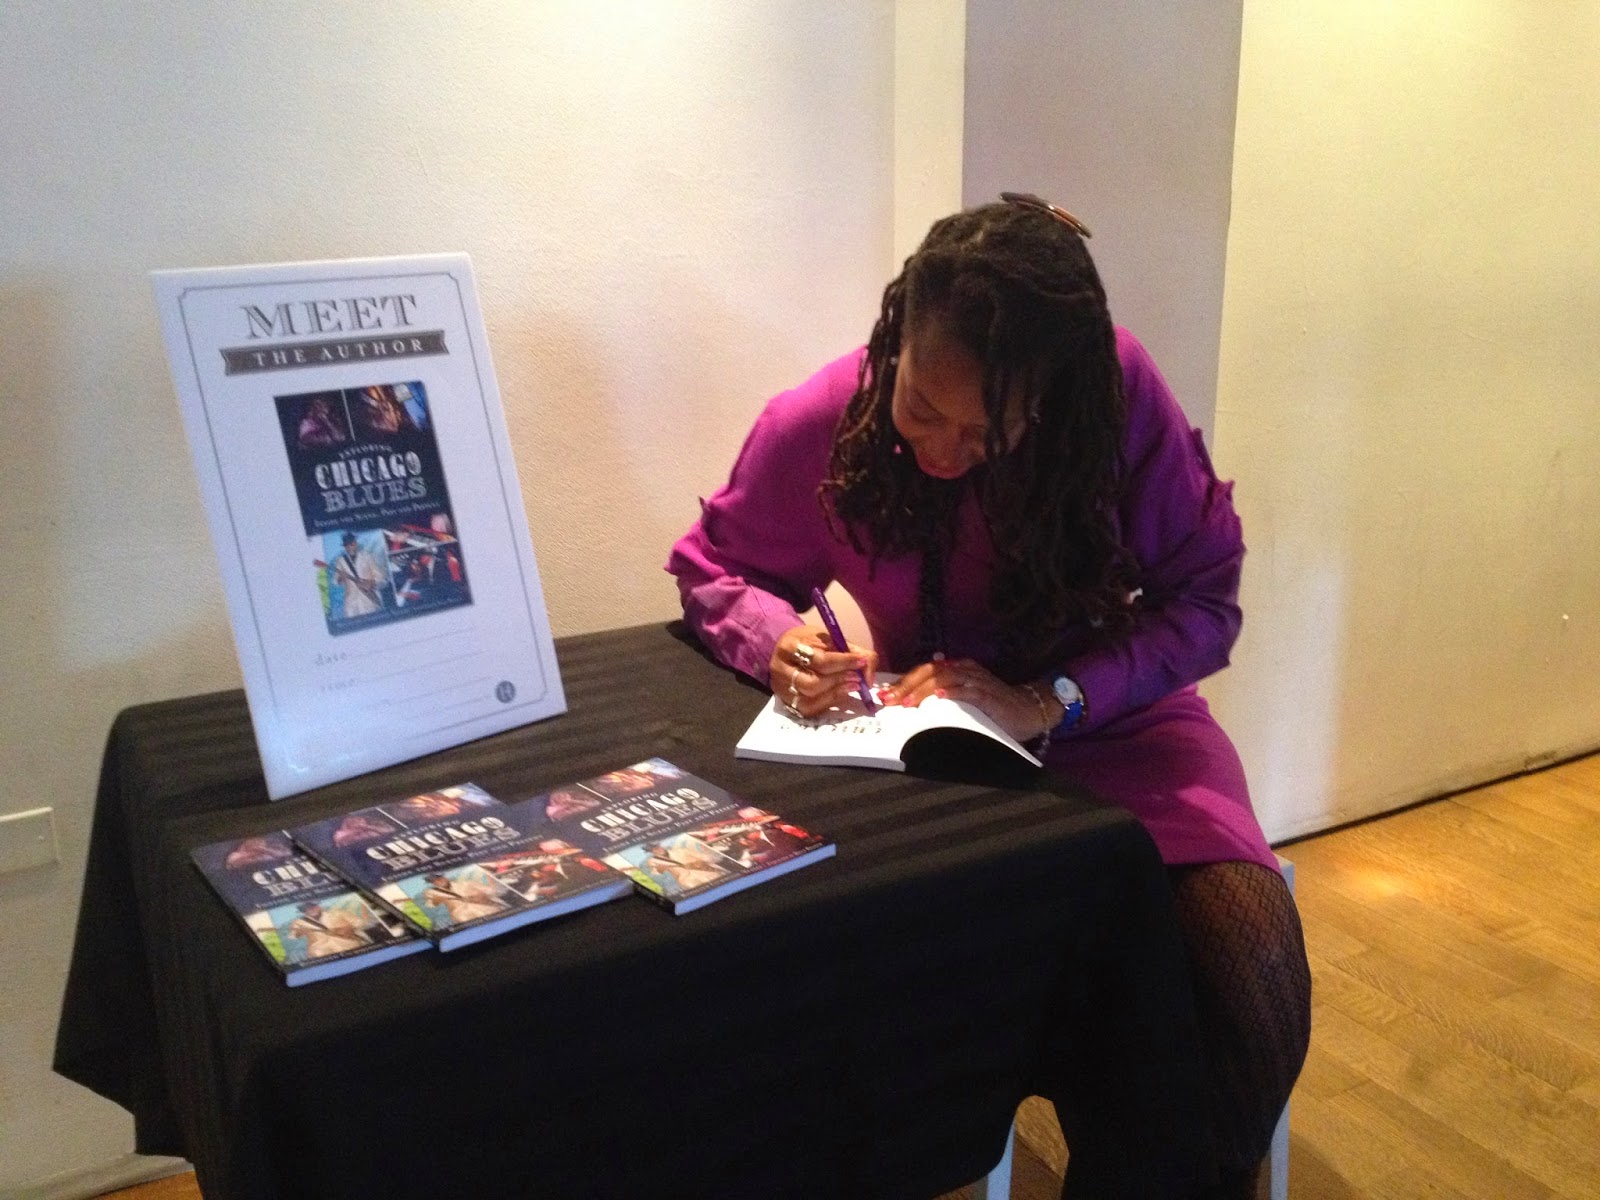 Exploring Chicago Blues by Rosalind Cummings-Yeates Book Signing Event